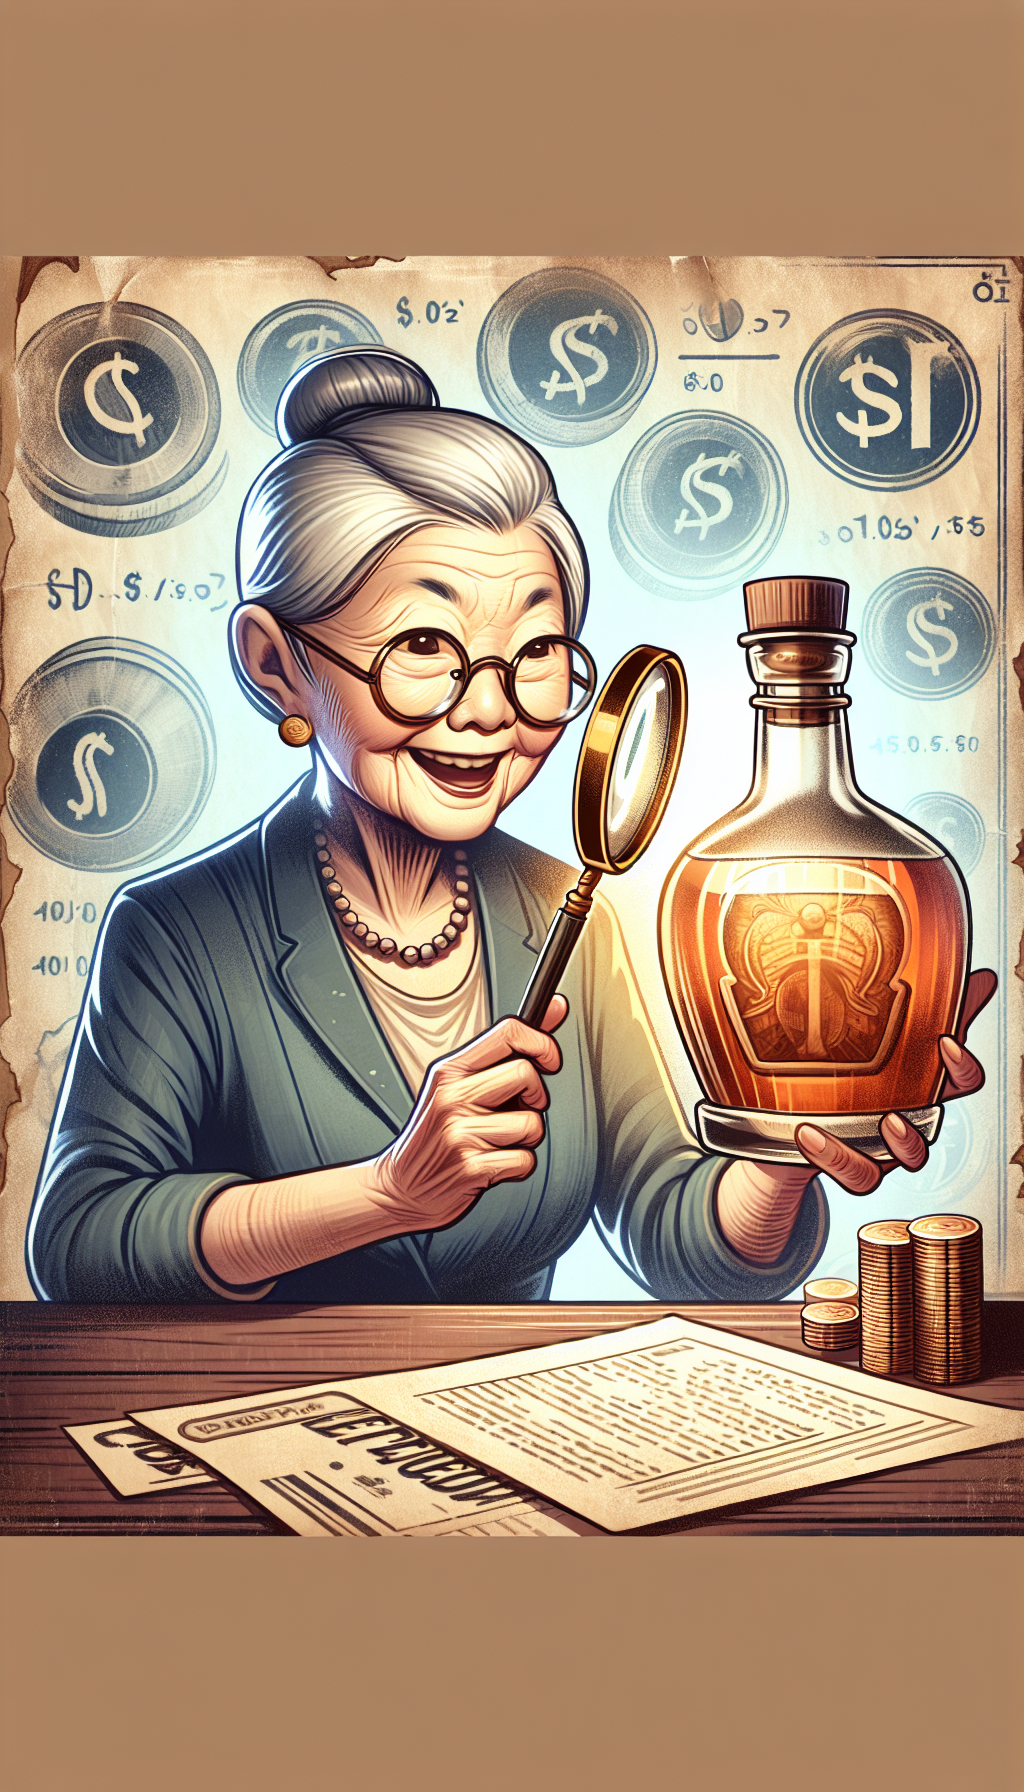 An illustration depicting an animated, elderly shopkeeper with an expert gleam in his eye, holding a magnifying glass to a vintage whiskey jug. The jug is illuminated by a spotlight, with faded images of dollar signs and age rings encompassing it, implying its value. The shopkeeper's other hand presents a list labeled "Collector's Tips", blending elements of wisdom and valuation.